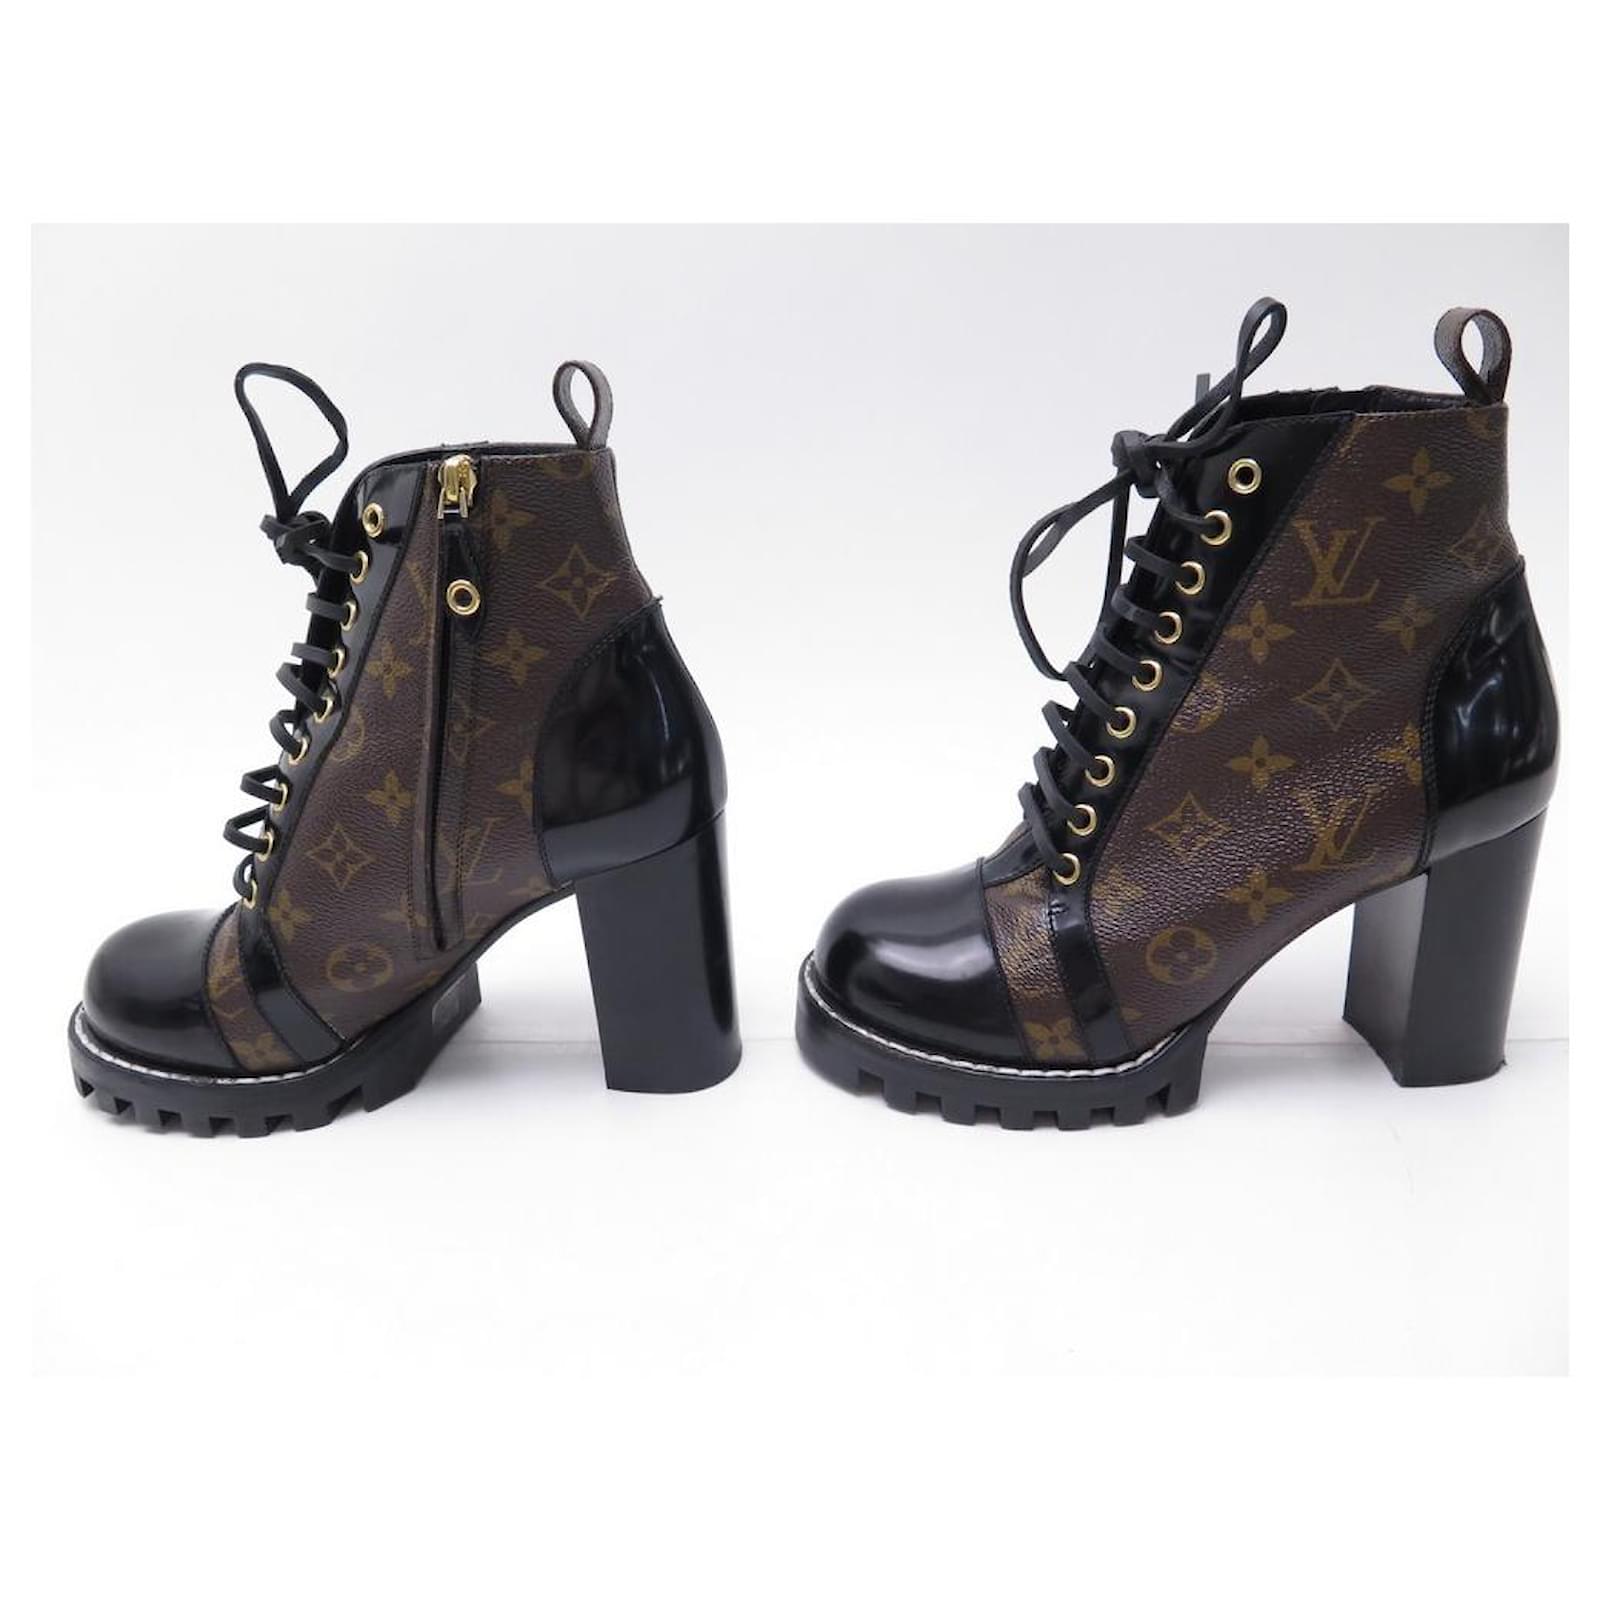 Louis Vuitton Fur Patent Leather Star Trail Ankle Boots - Closet Upgrade